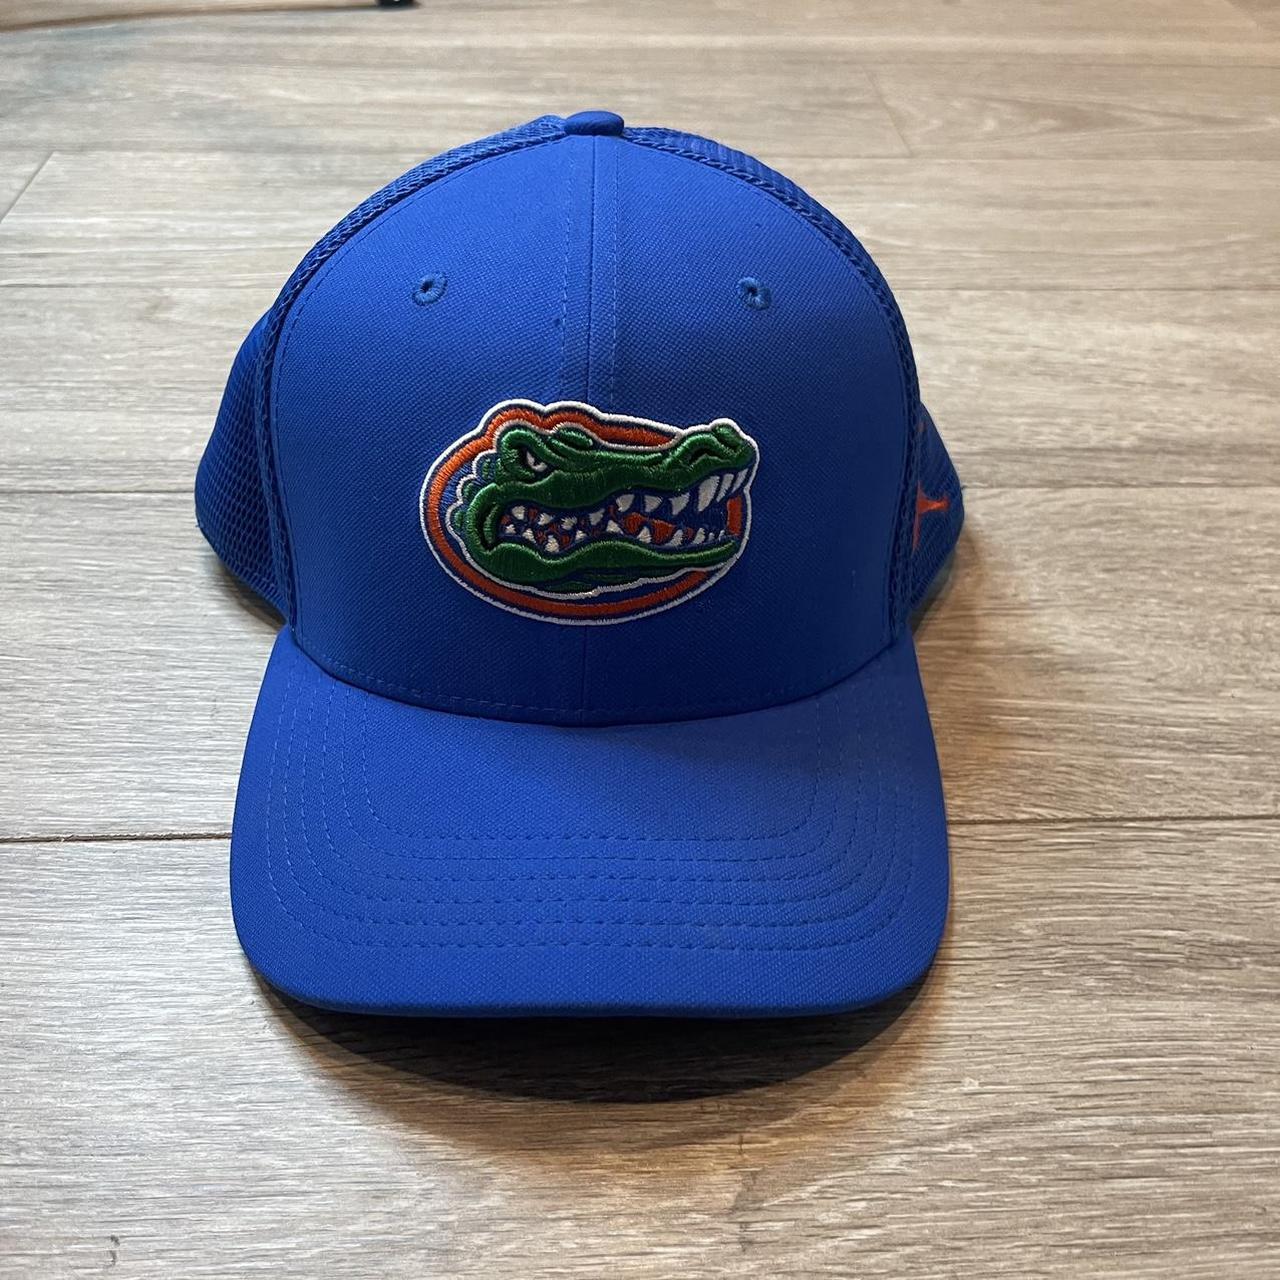 Mens Florida Fitted Hats, Florida Gators Fitted Caps, Hat